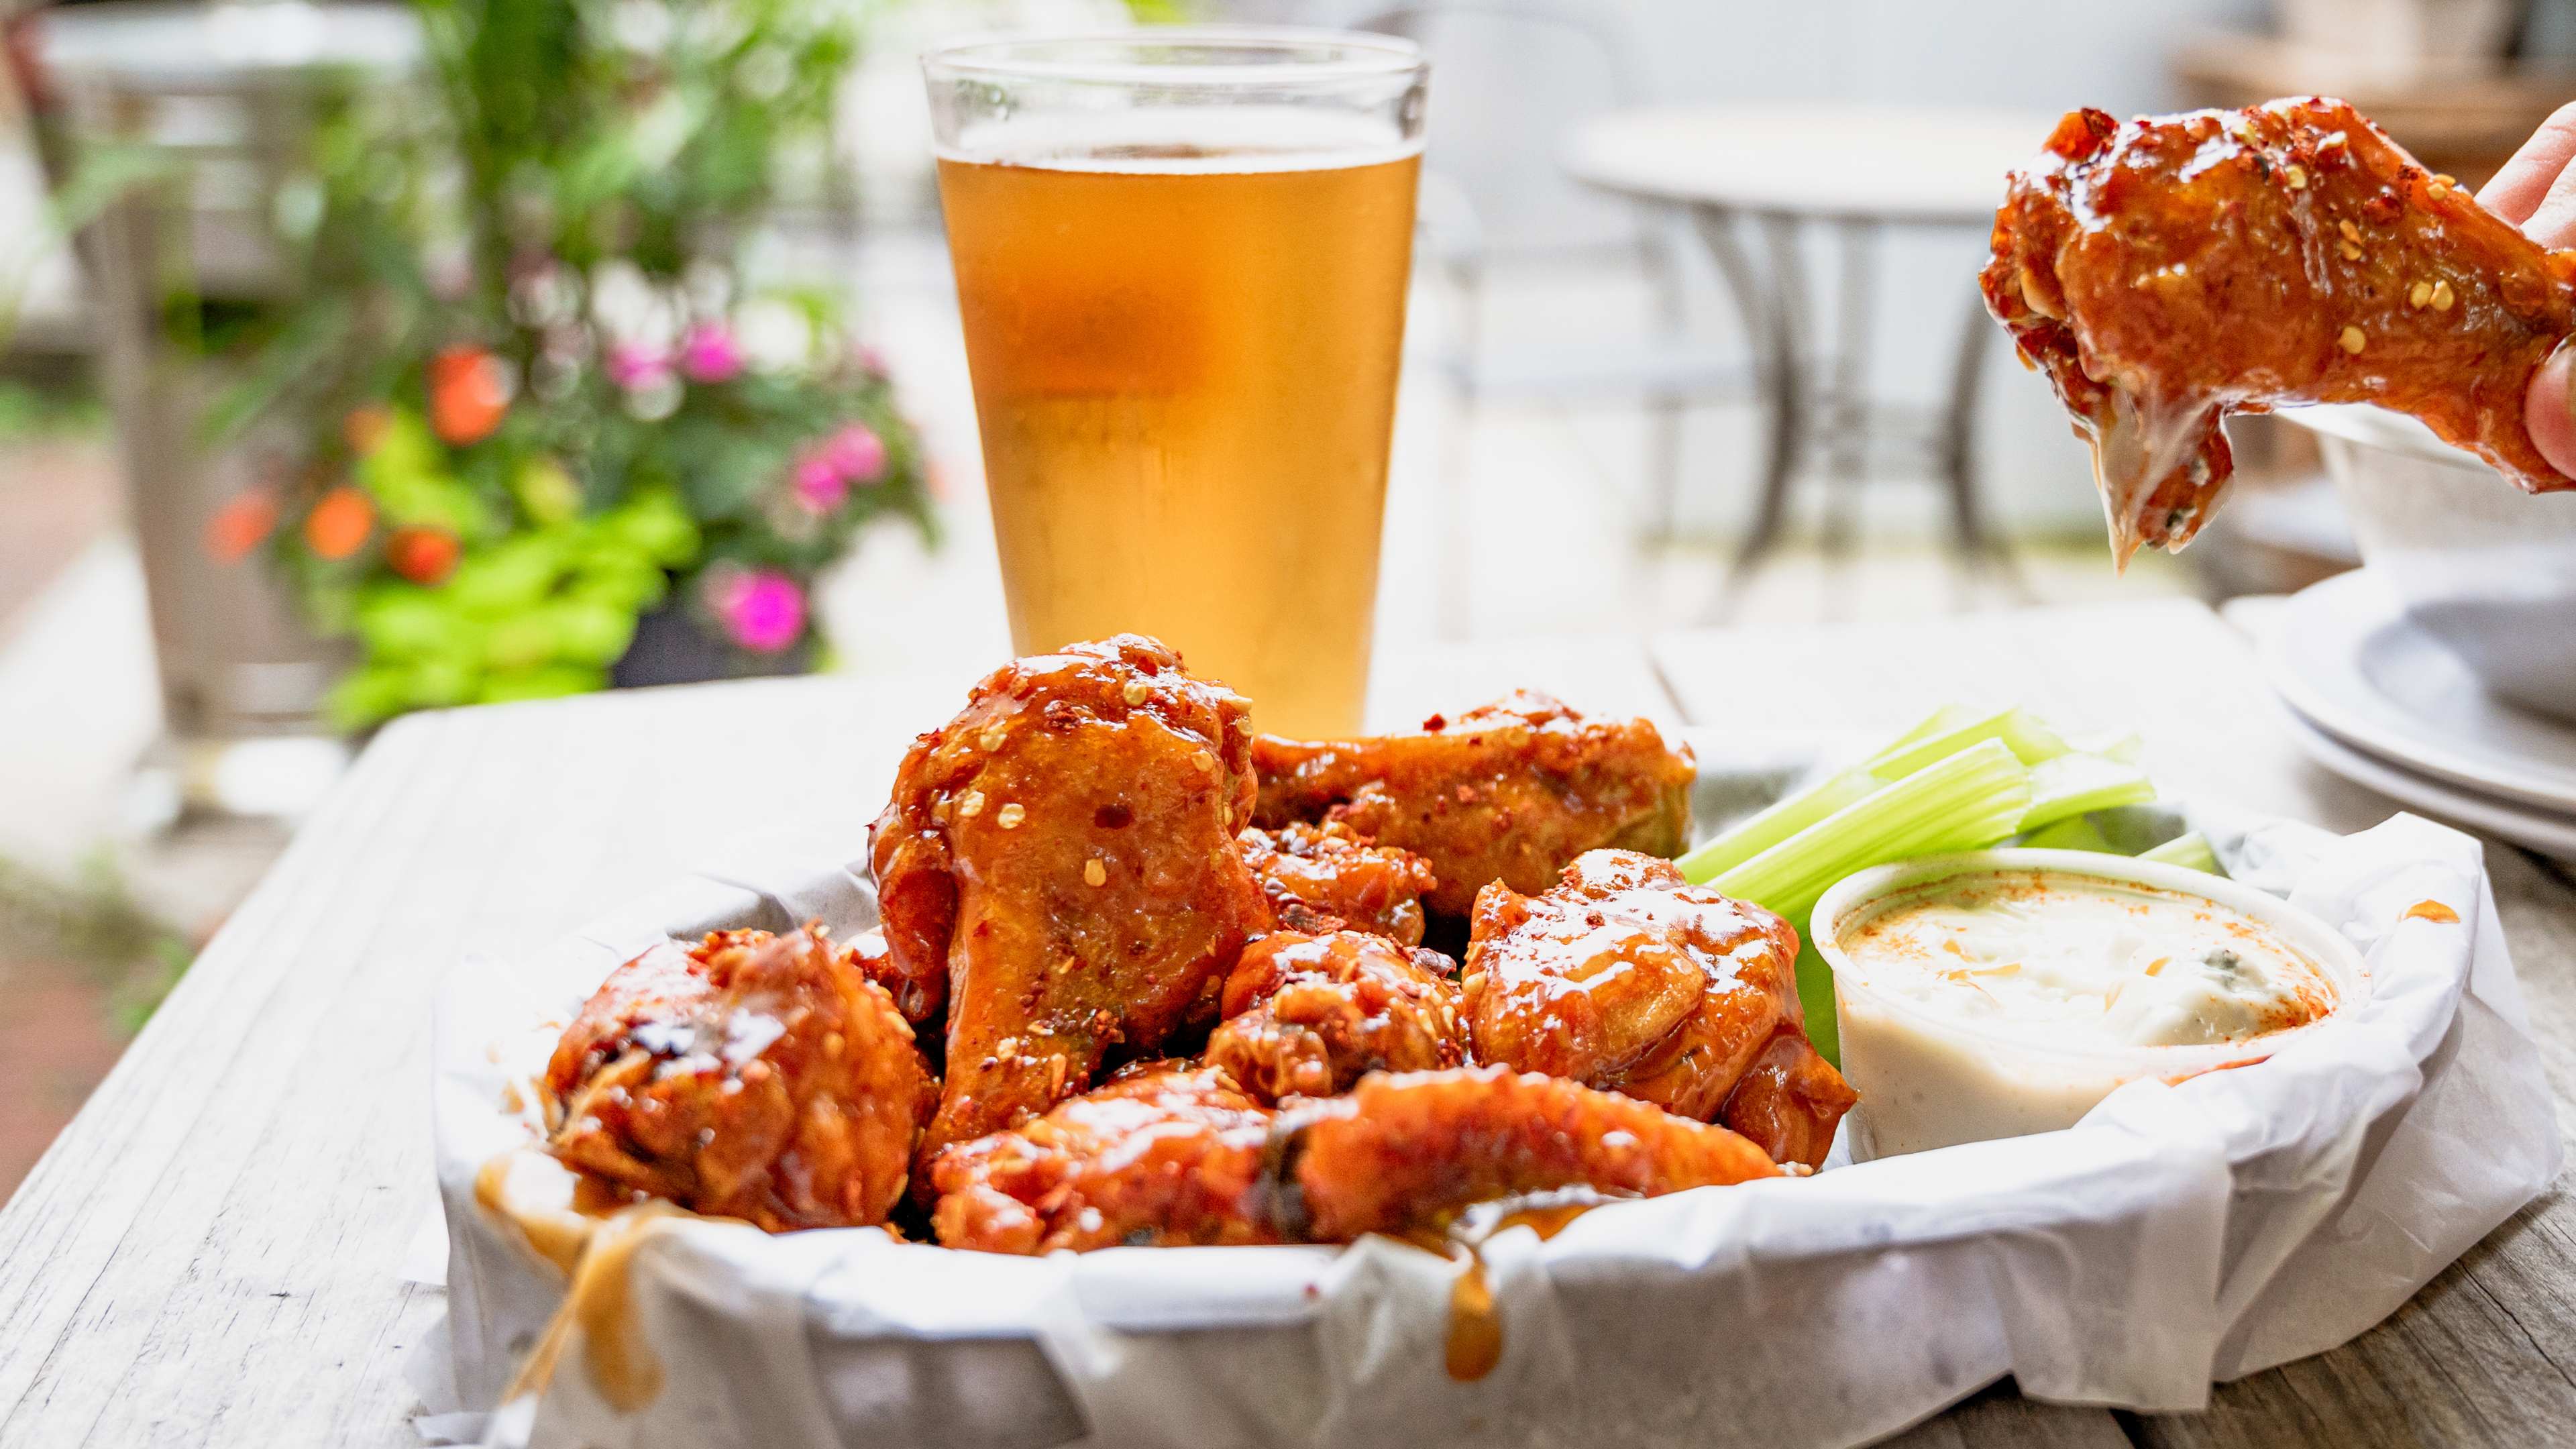 These are the buffalo wings from Union Tap House.